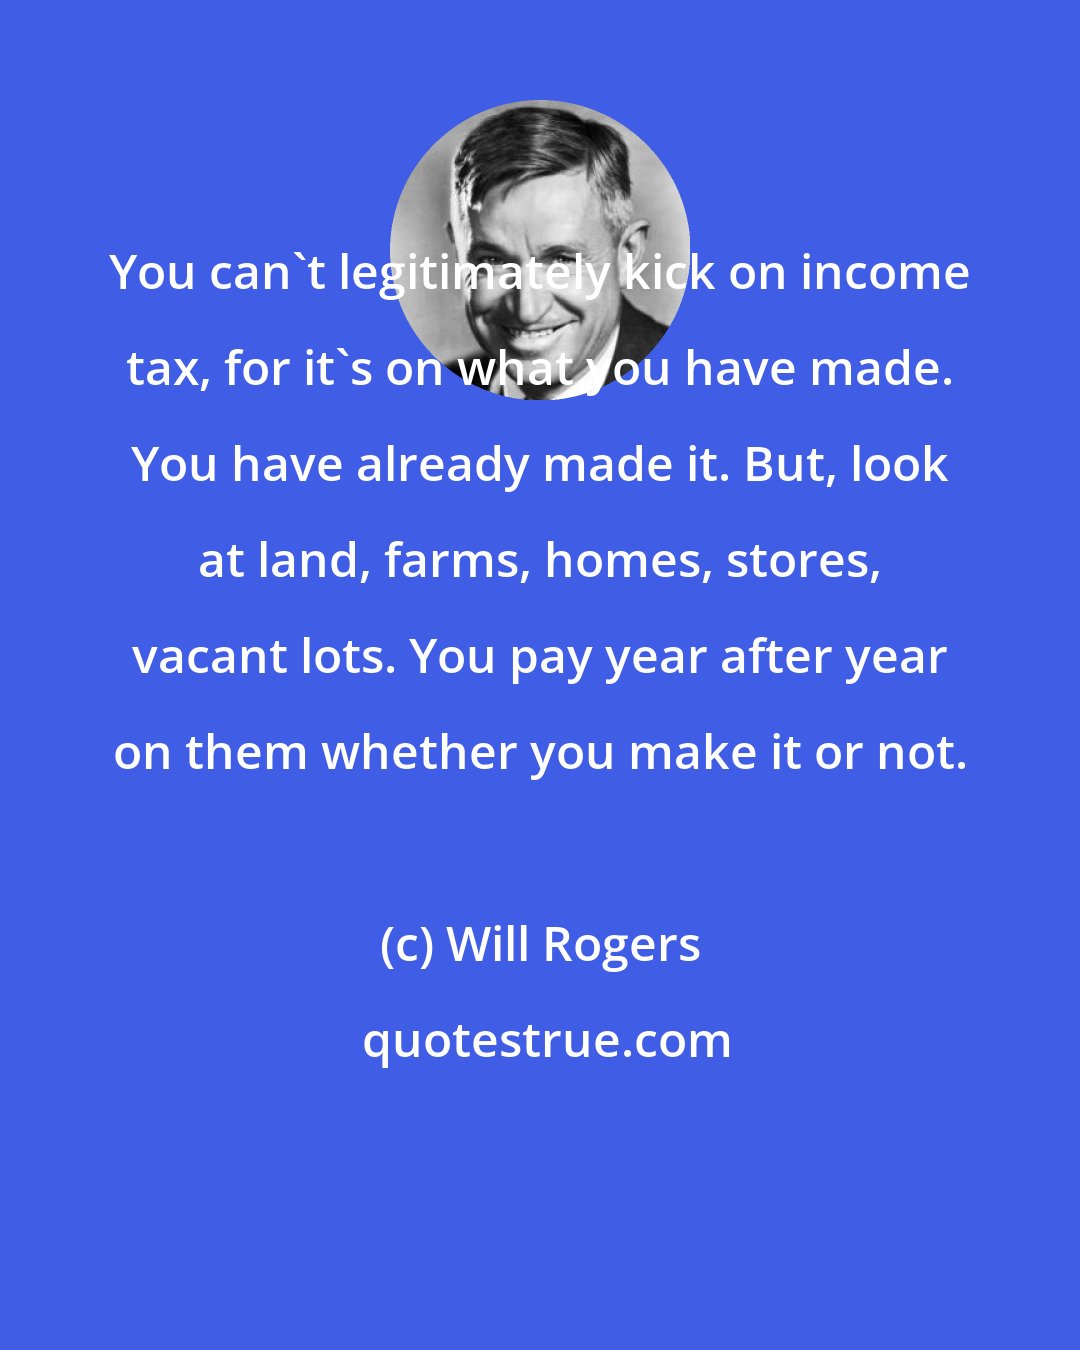 Will Rogers: You can't legitimately kick on income tax, for it's on what you have made. You have already made it. But, look at land, farms, homes, stores, vacant lots. You pay year after year on them whether you make it or not.